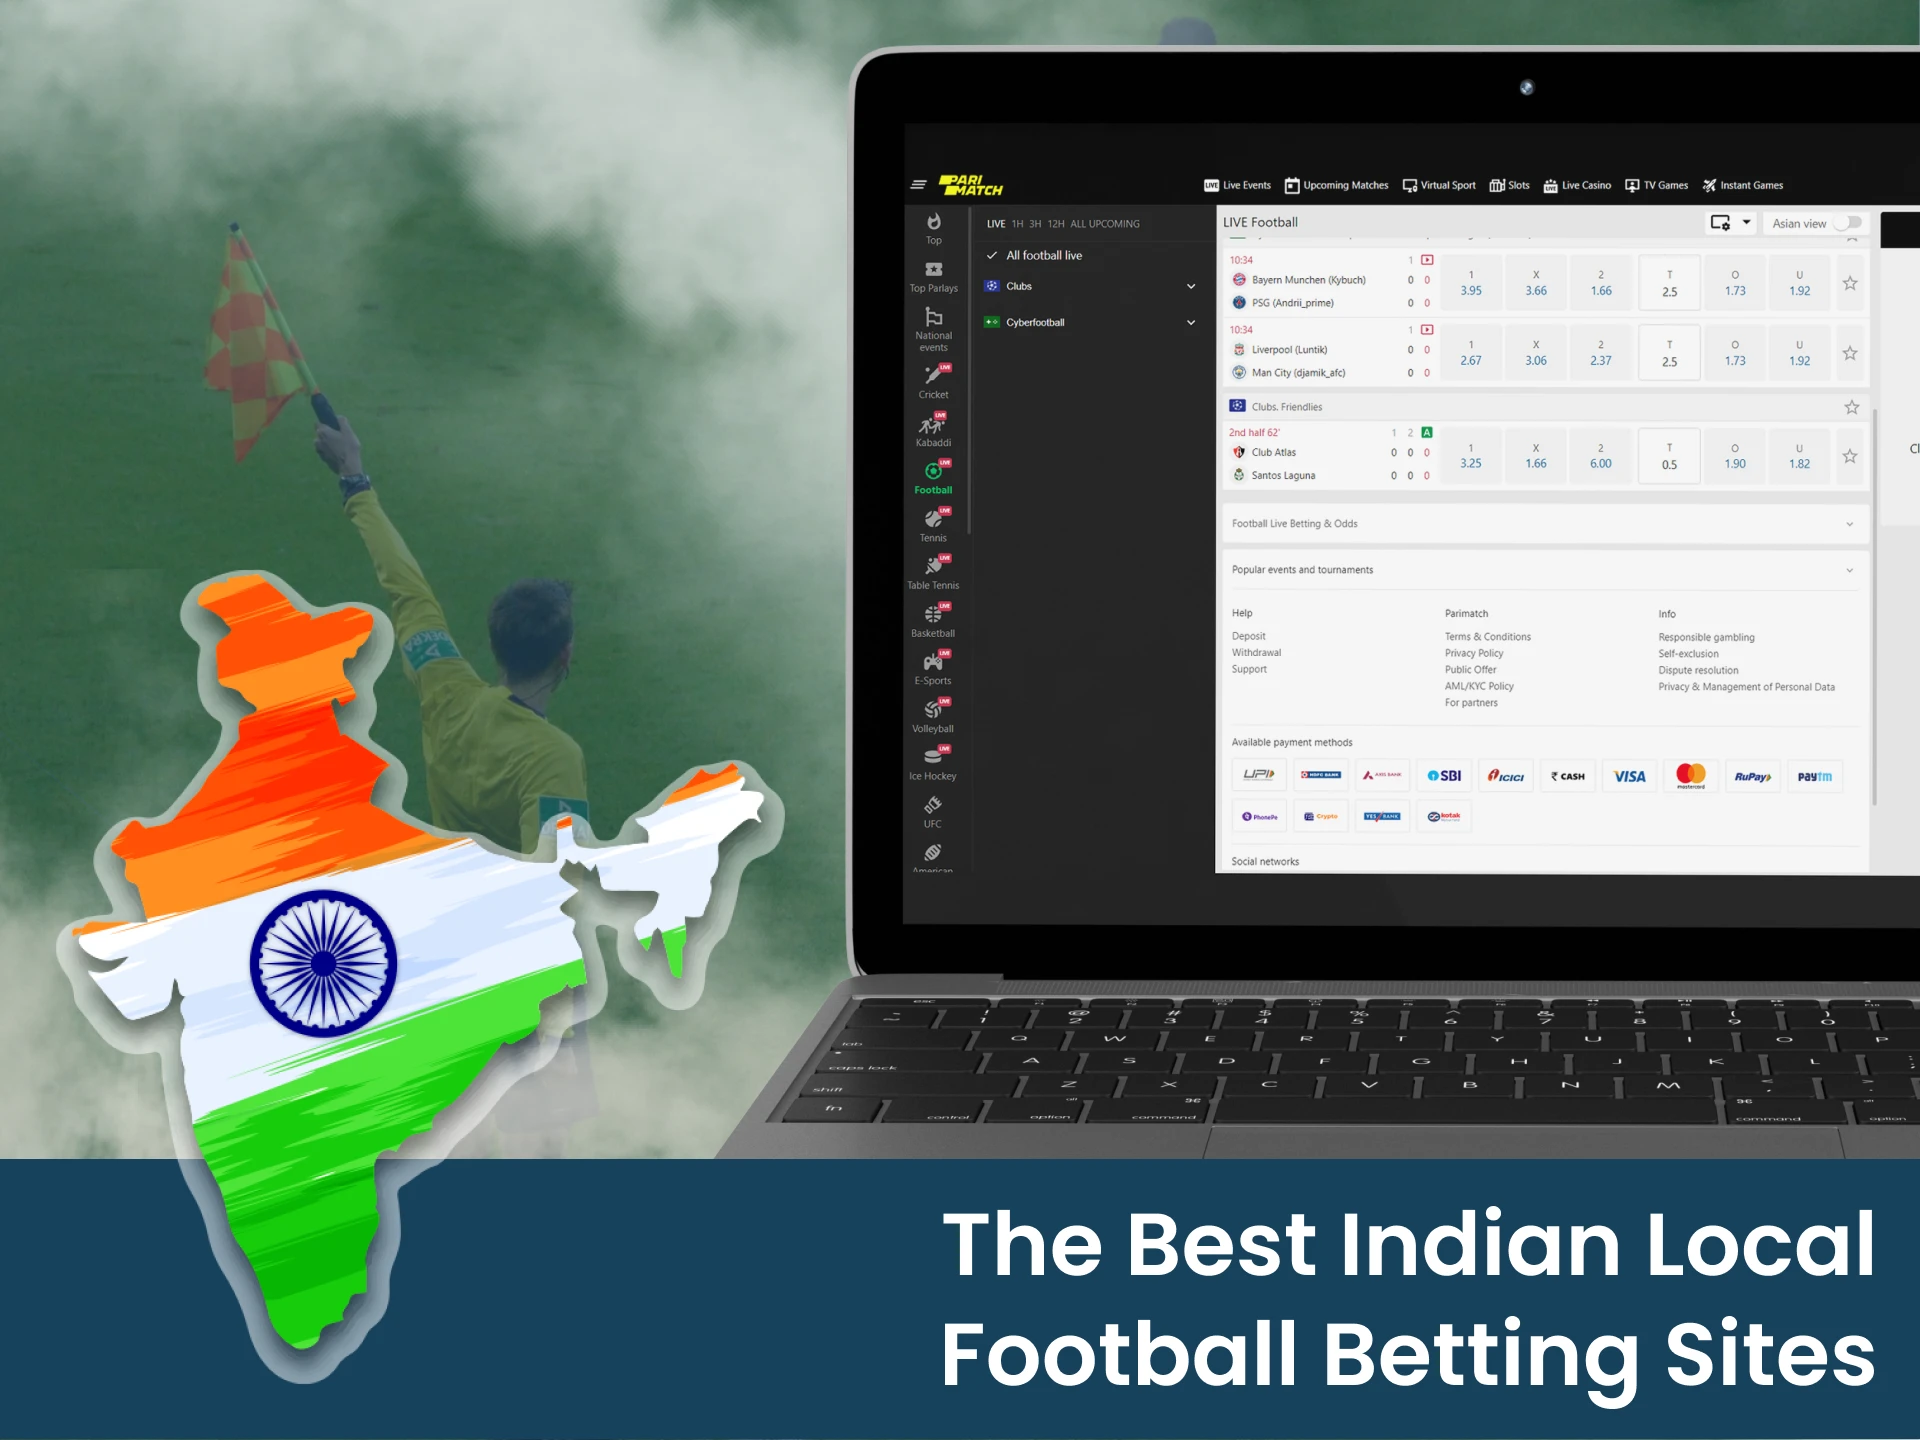 In India, there are a few local bookmakers accepting bets on football.